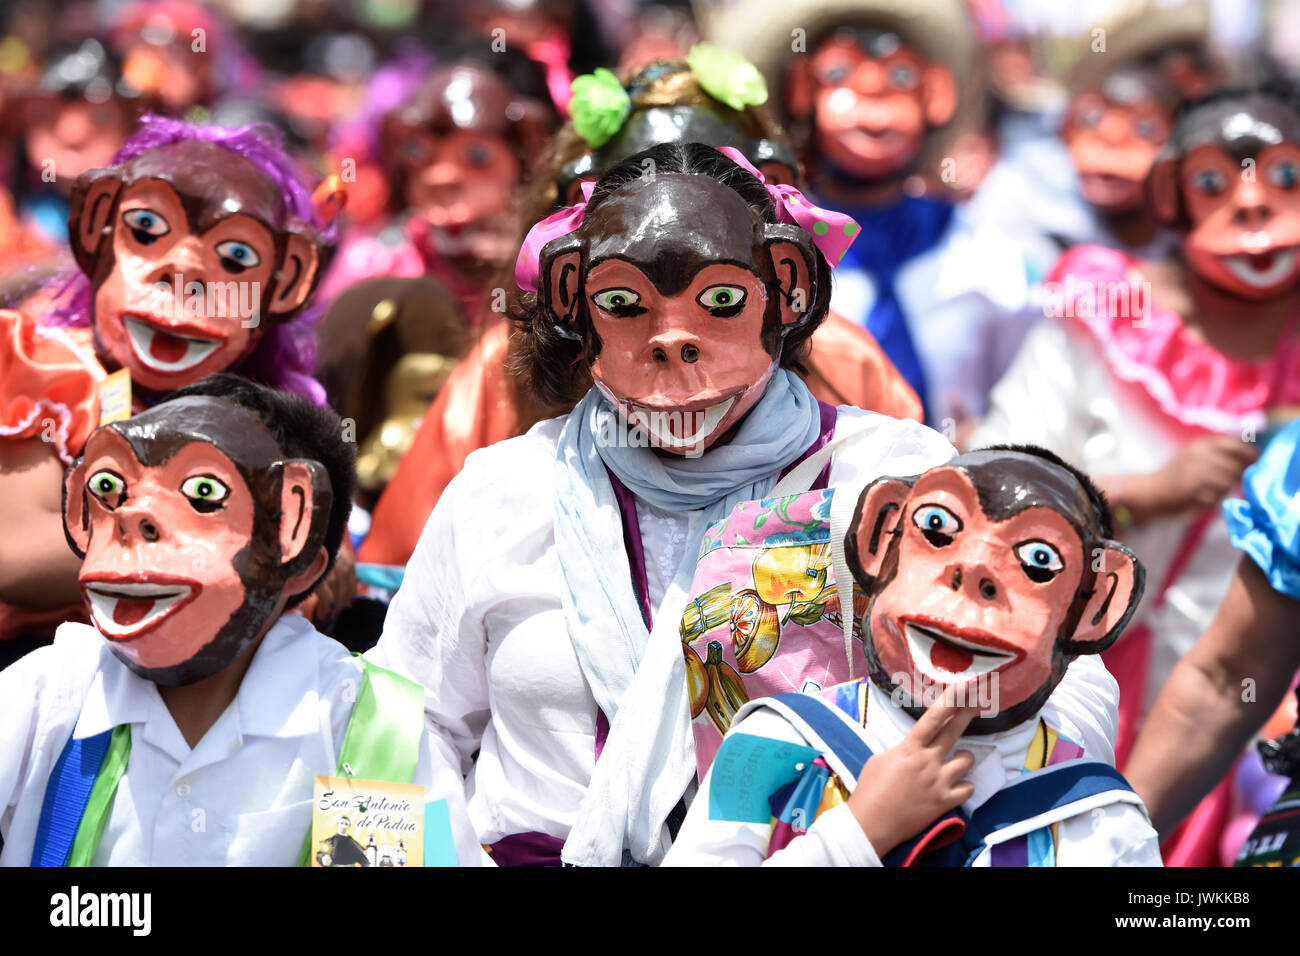 Participants dressed in monkey humouristic costume are walking though the street. Hundreds of people are seen participating during the annual parade of The Crazy Ones, a traditional  parade to celebrate welcome of the Holiday of San Antonio. Stock Photo